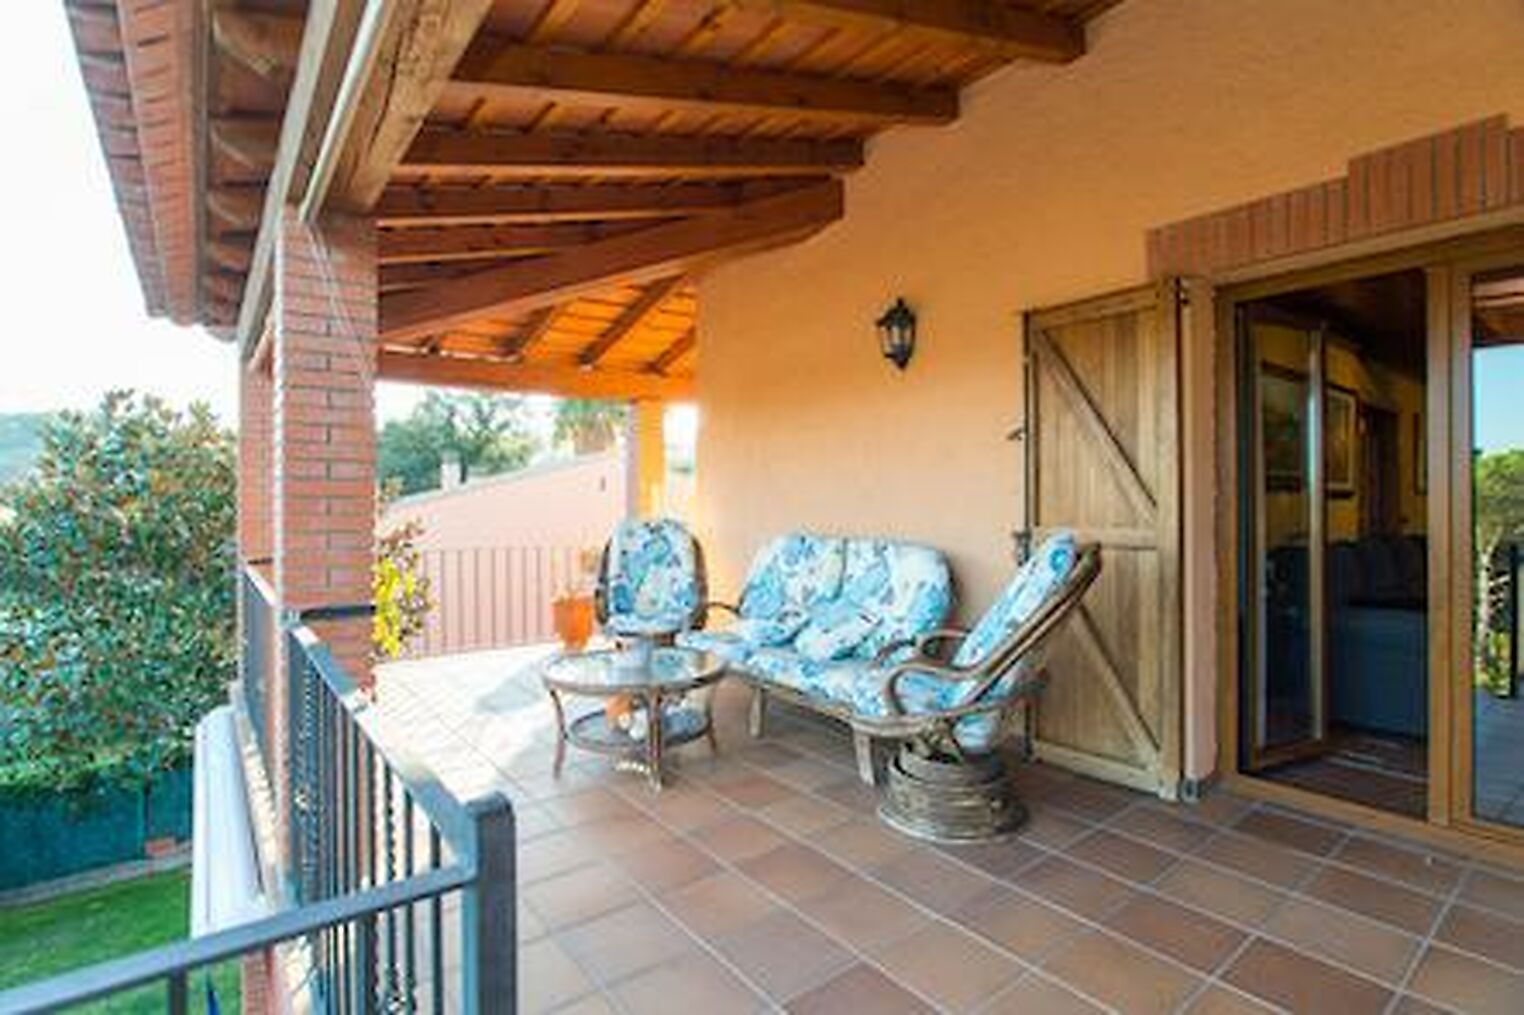 Superb, large detached villa, built to a very high standard, well maintained and close to the pretty village of Calonge and Playa de Aro.